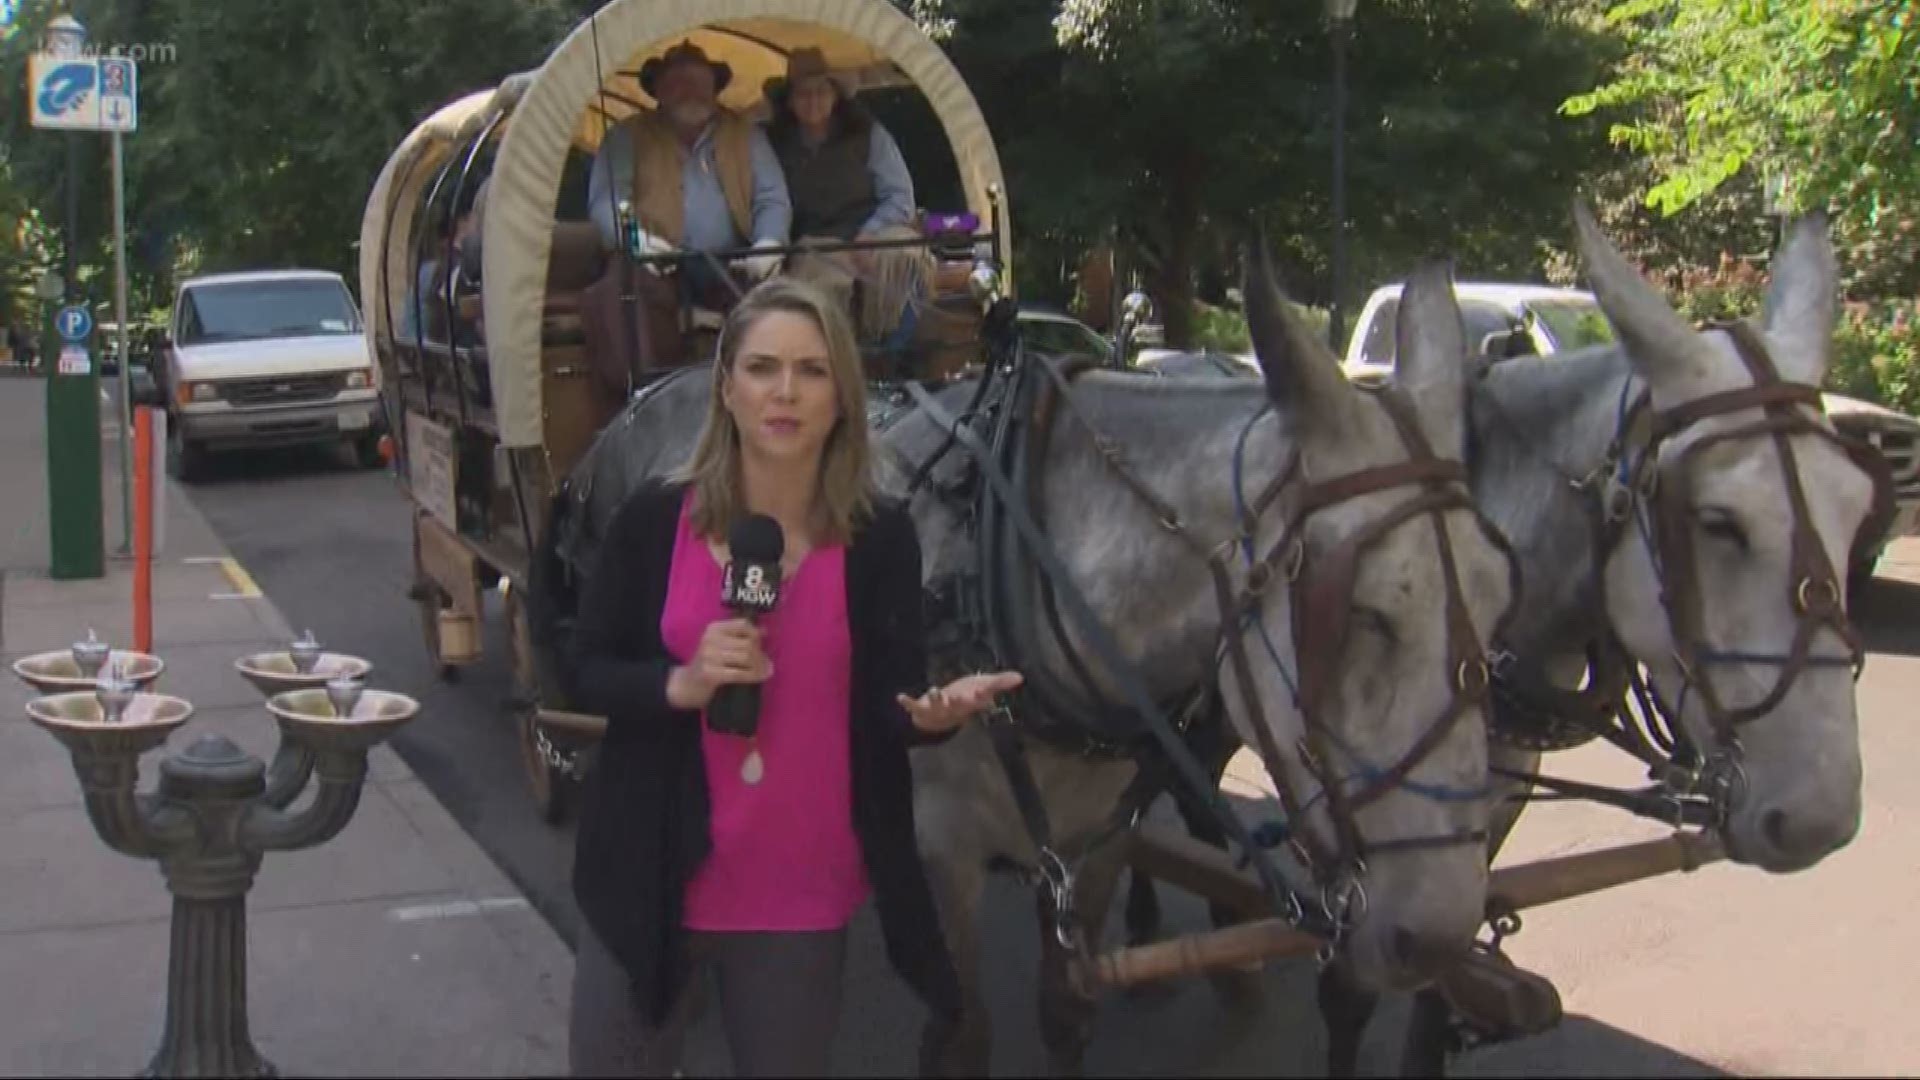 Get a Lyft ride in a covered wagon to celebrate the 175th anniversary of the Oregon Trail. Use code oregontrail175 in the Lyft app.

#TonightwithCassidy